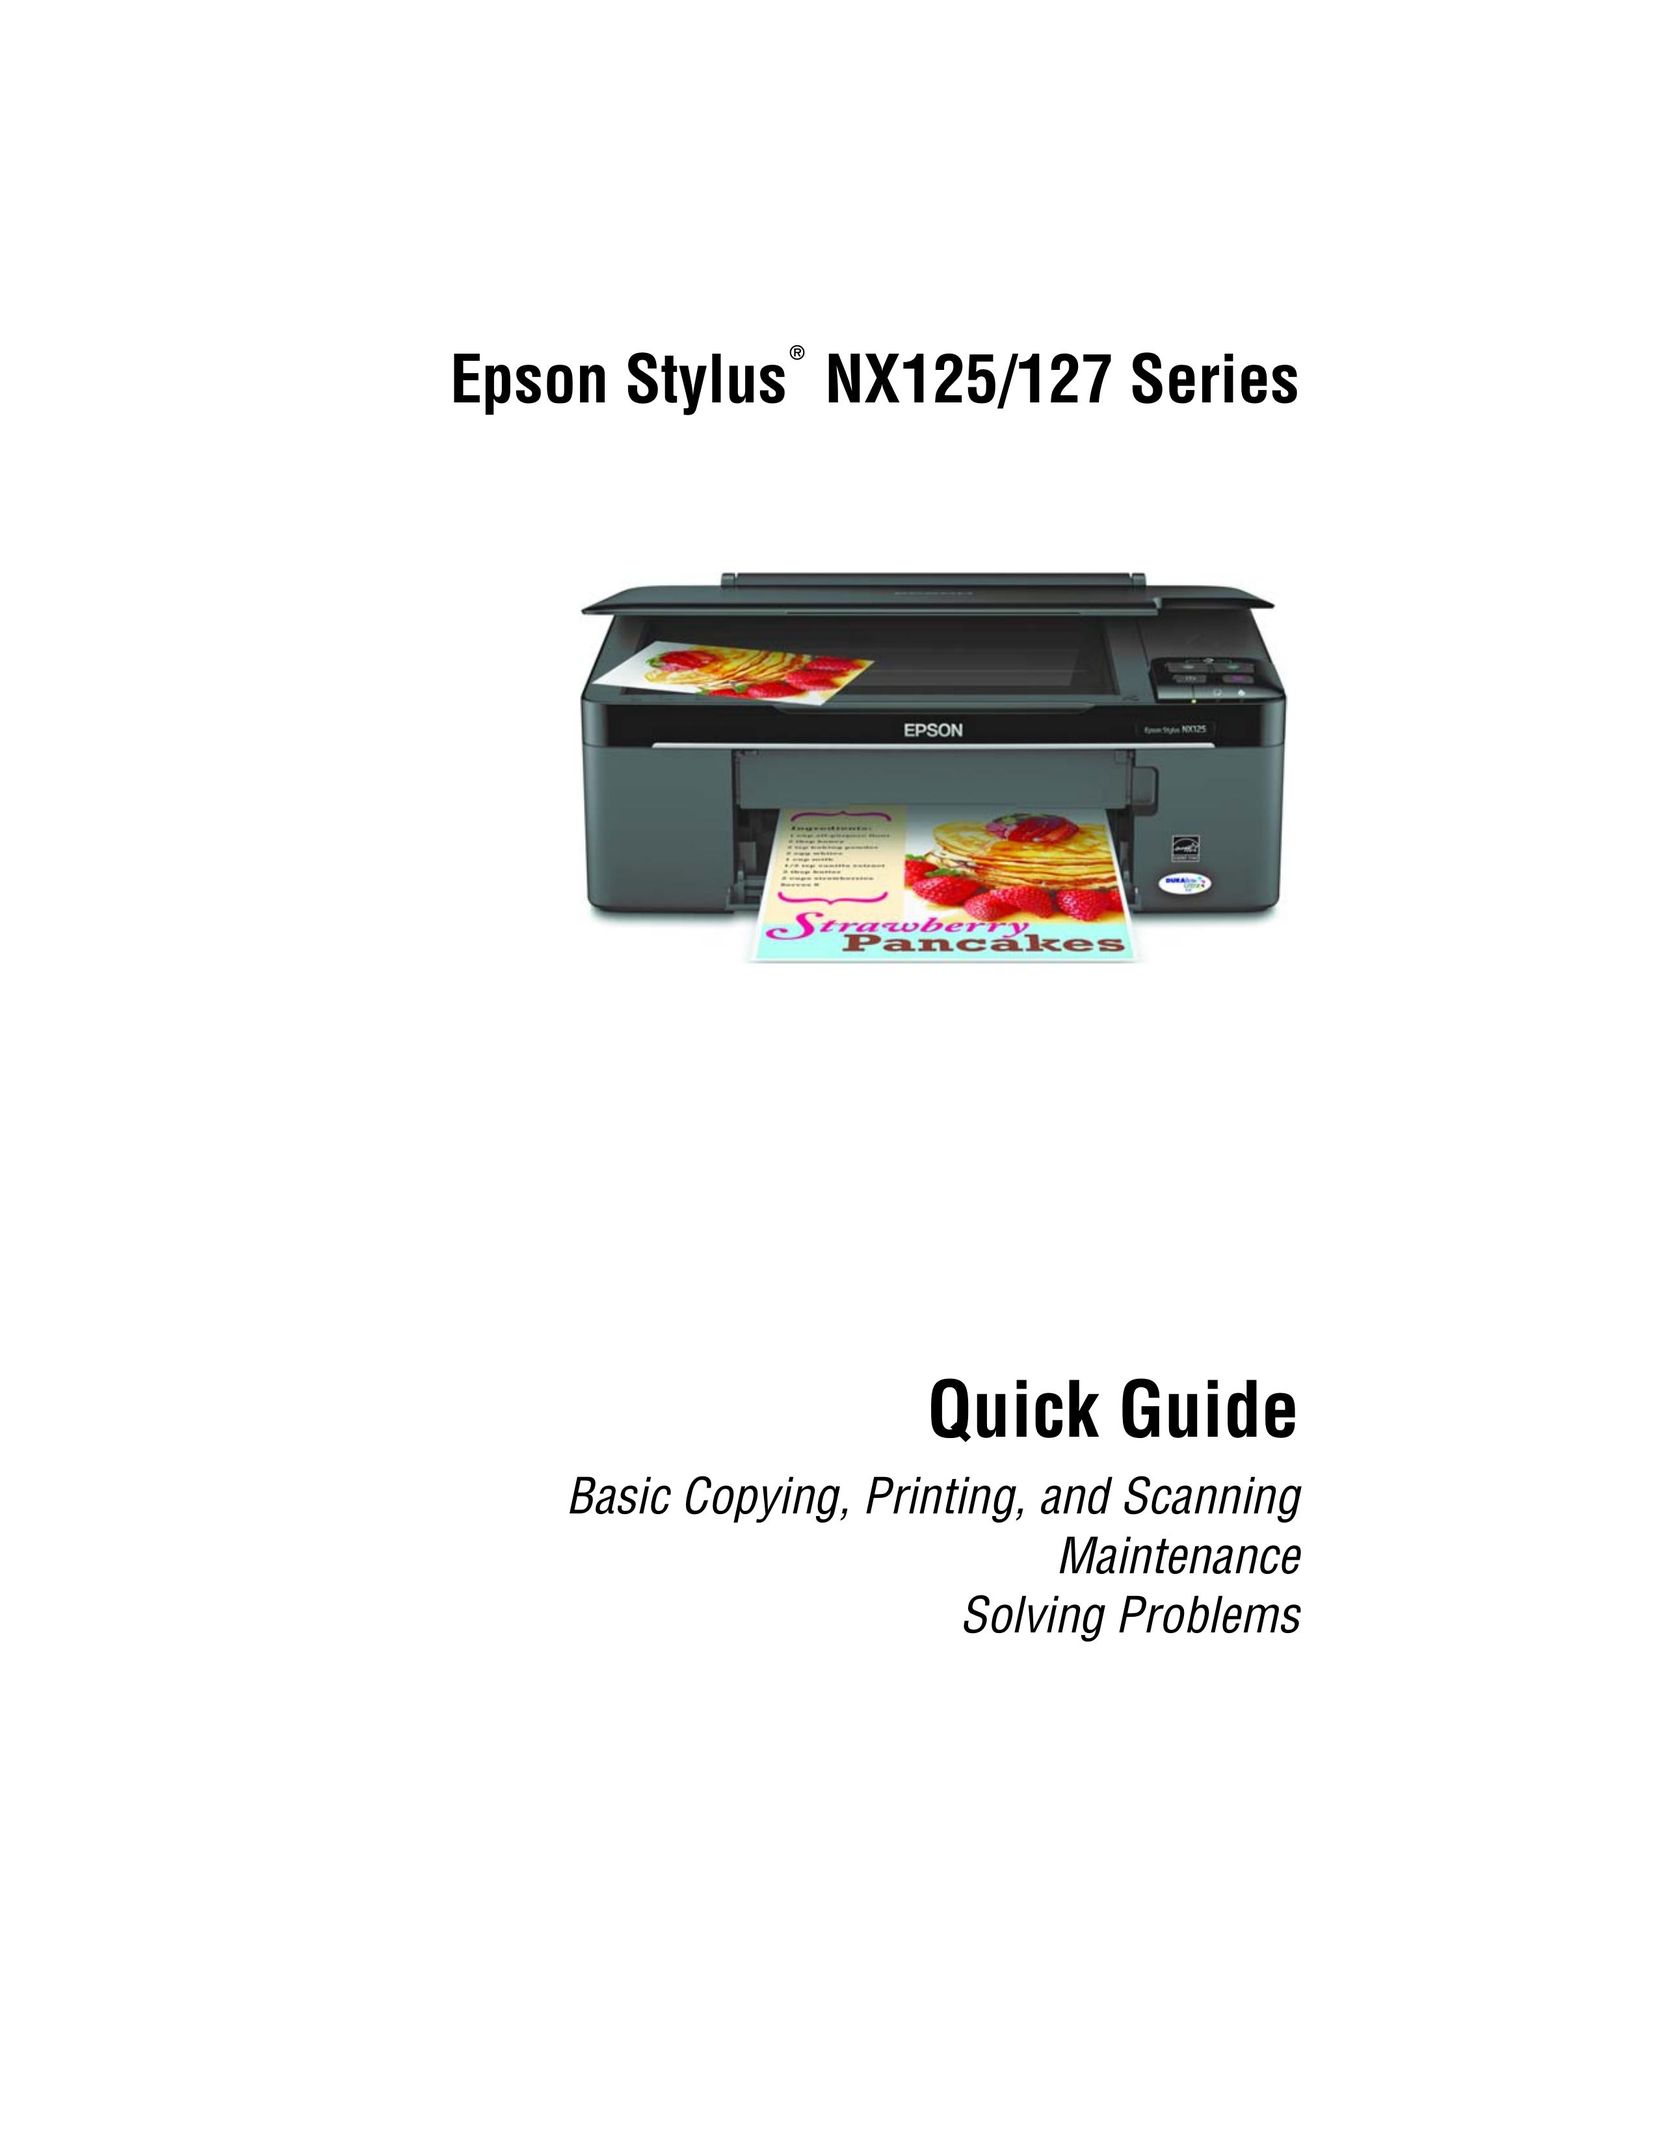 Freescale Semiconductor NX127 All in One Printer User Manual